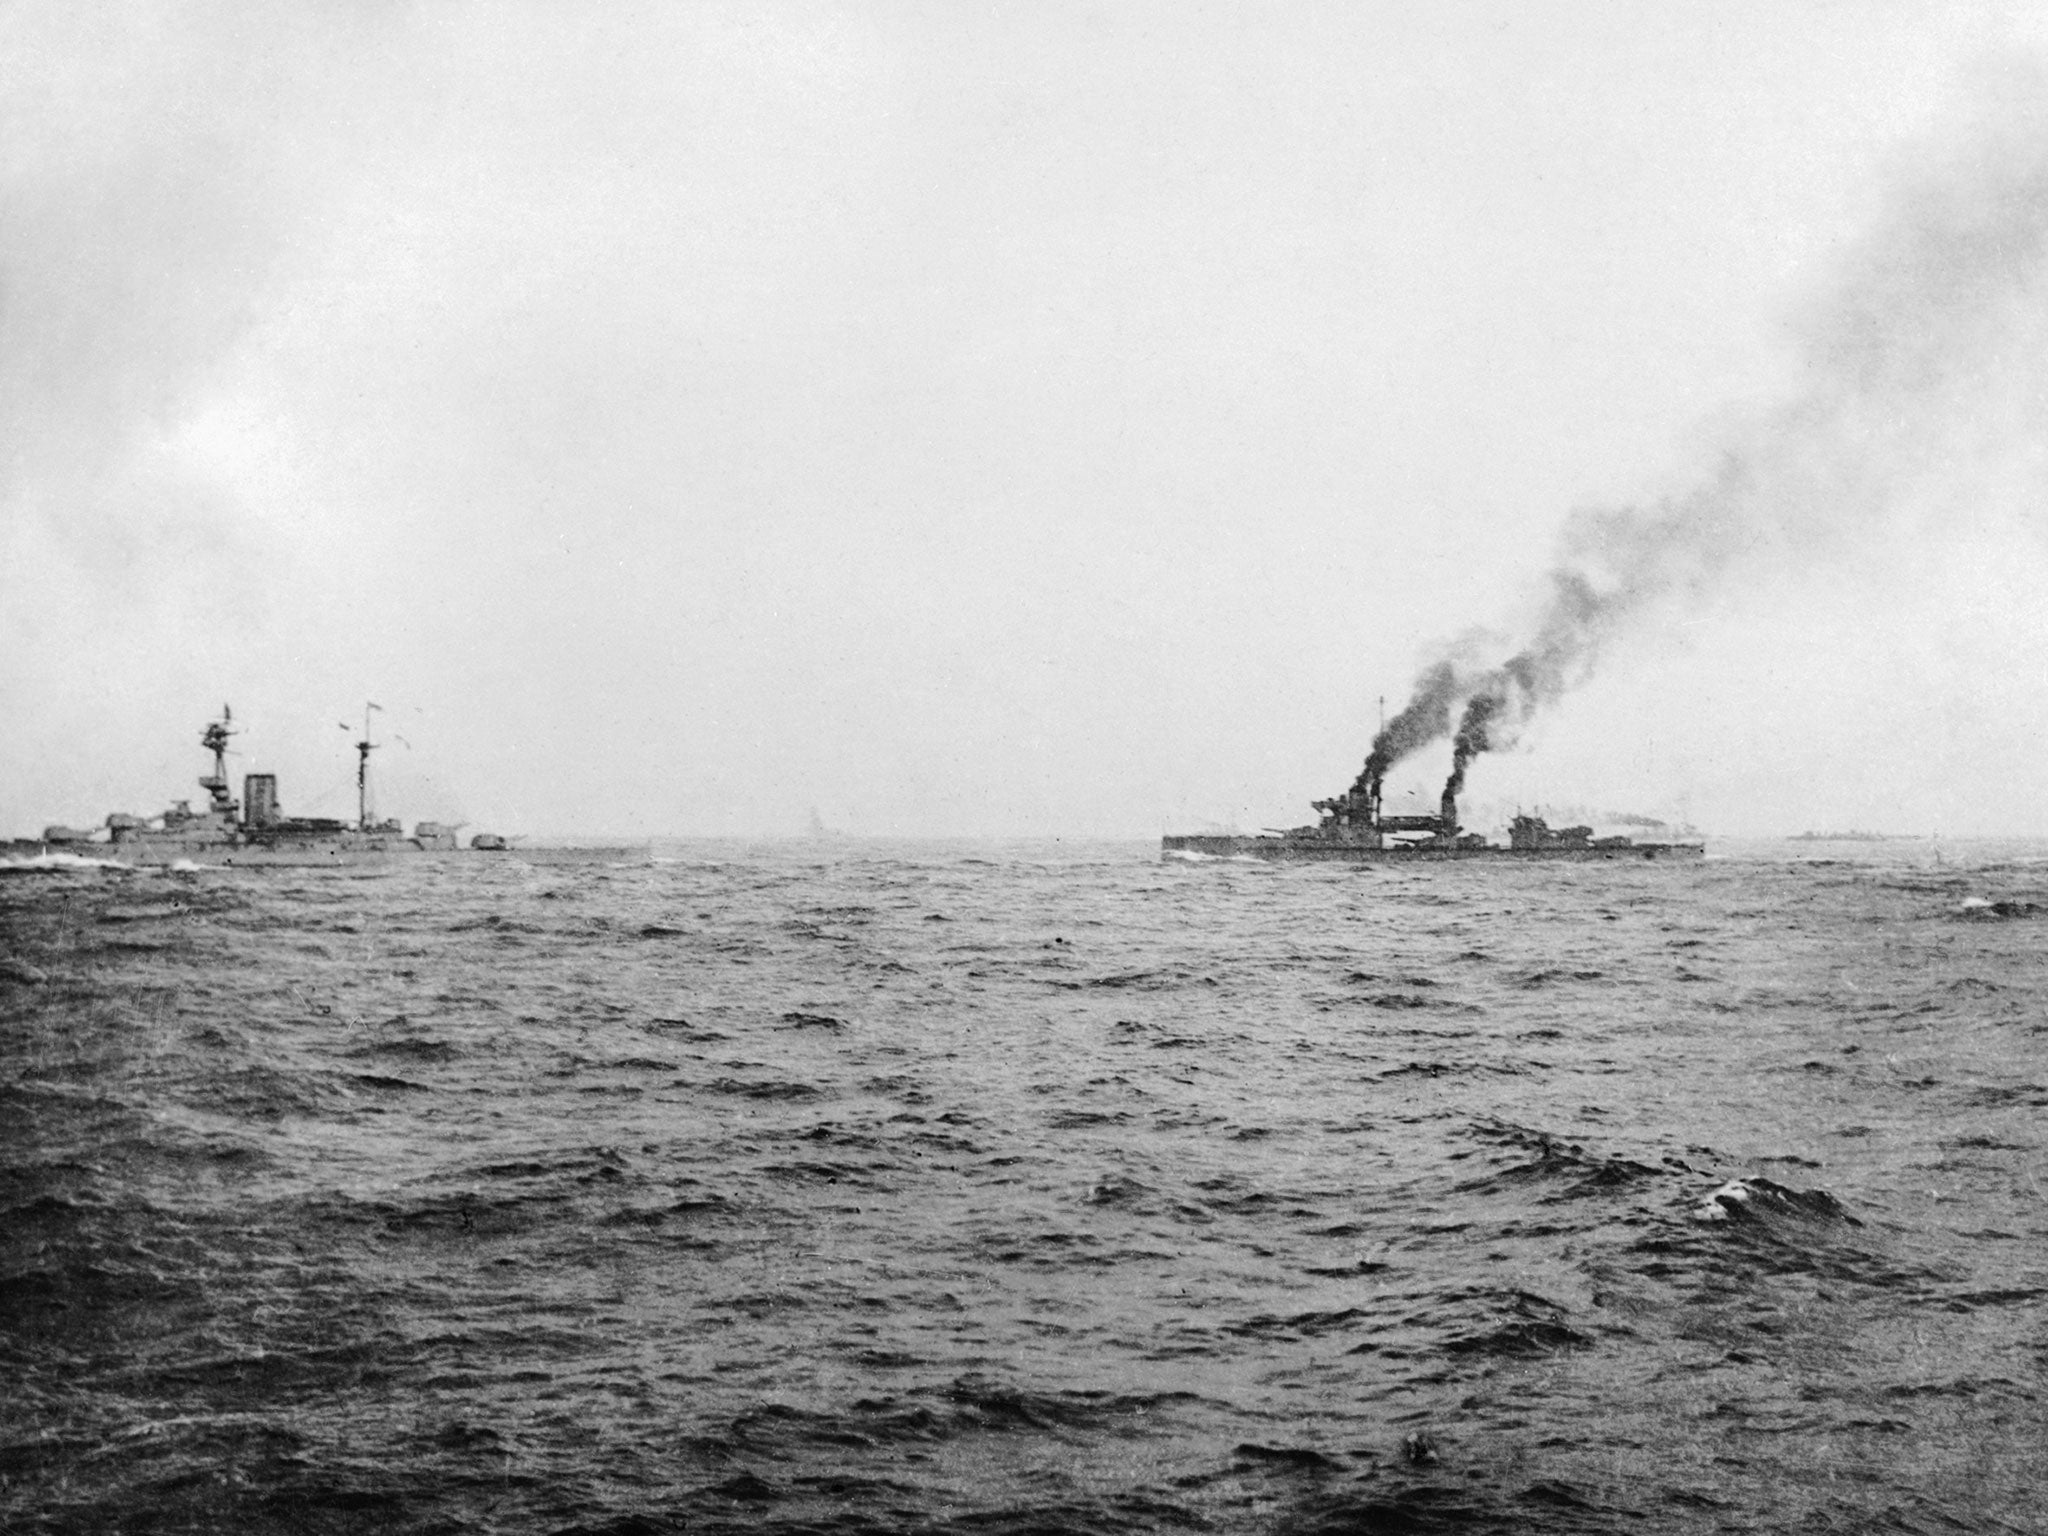 Handout photo issued by the Imperial War Museum of HMS Revenge and HMS Hercules, part of the First Battle Squadron commanded by Vice Admiral Sir Cecil Burney, underway before the battle of Jutland